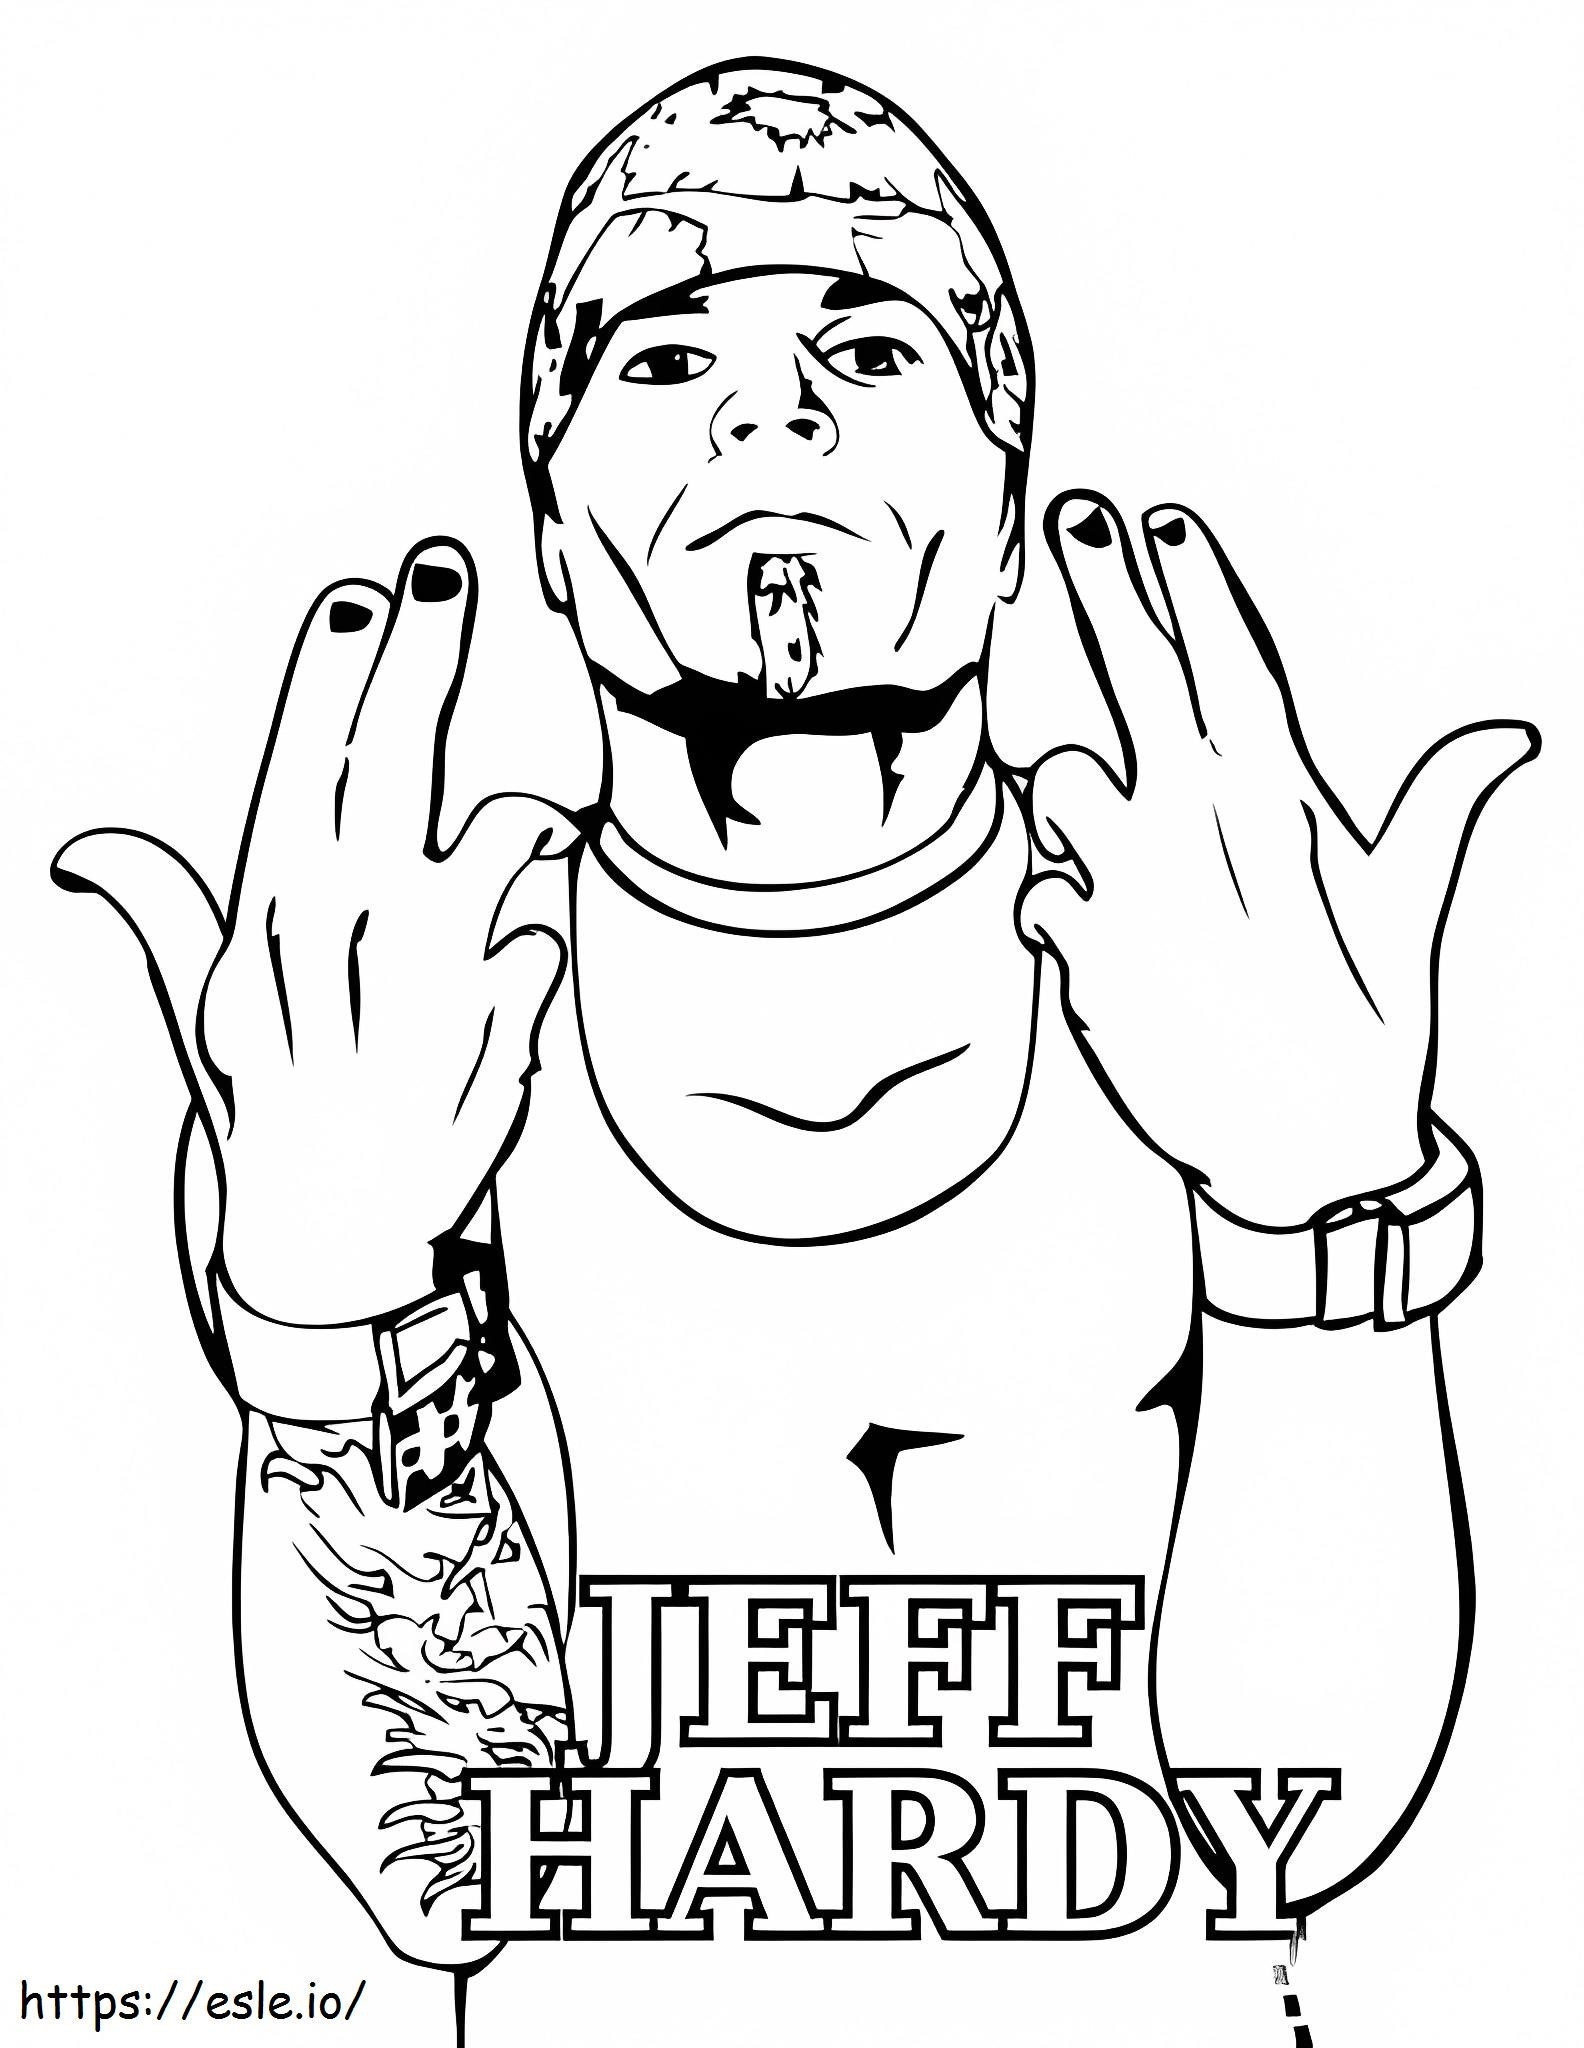 Jeff Hardy coloring page